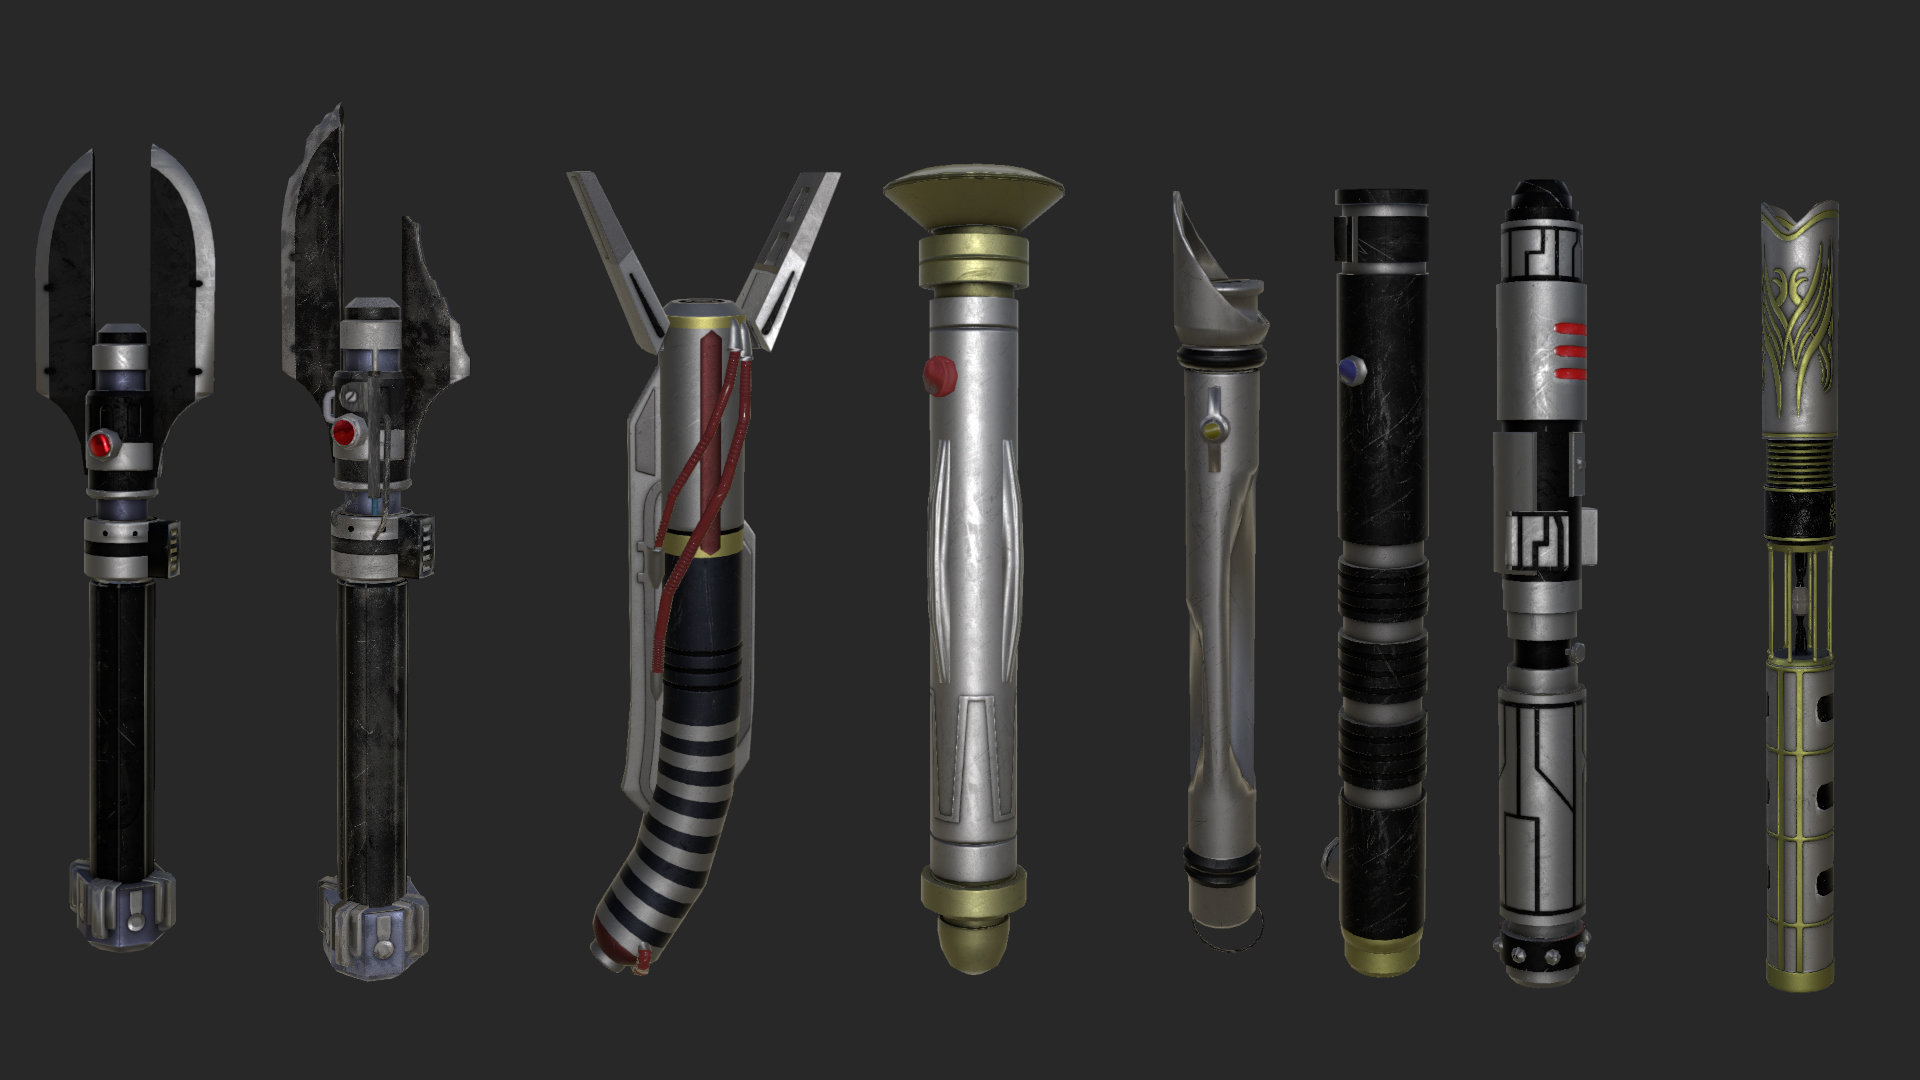 More information about "Lightsabers From The Old Republic"